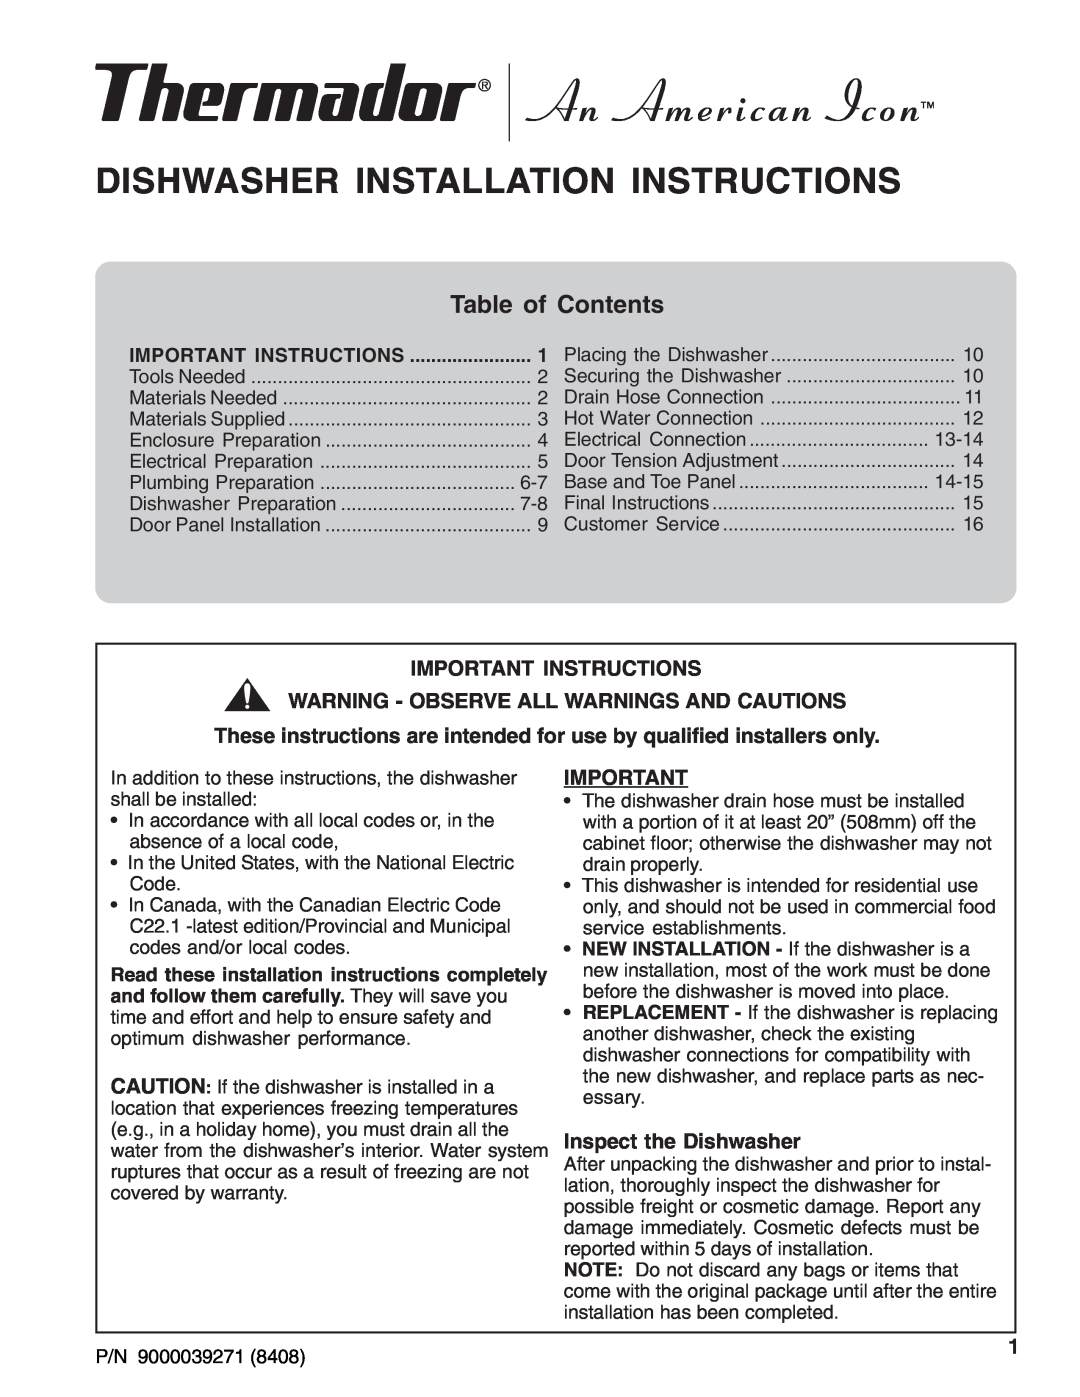 Thermador 9000039271 installation instructions Dishwasher Installation Instructions, Important Instructions 